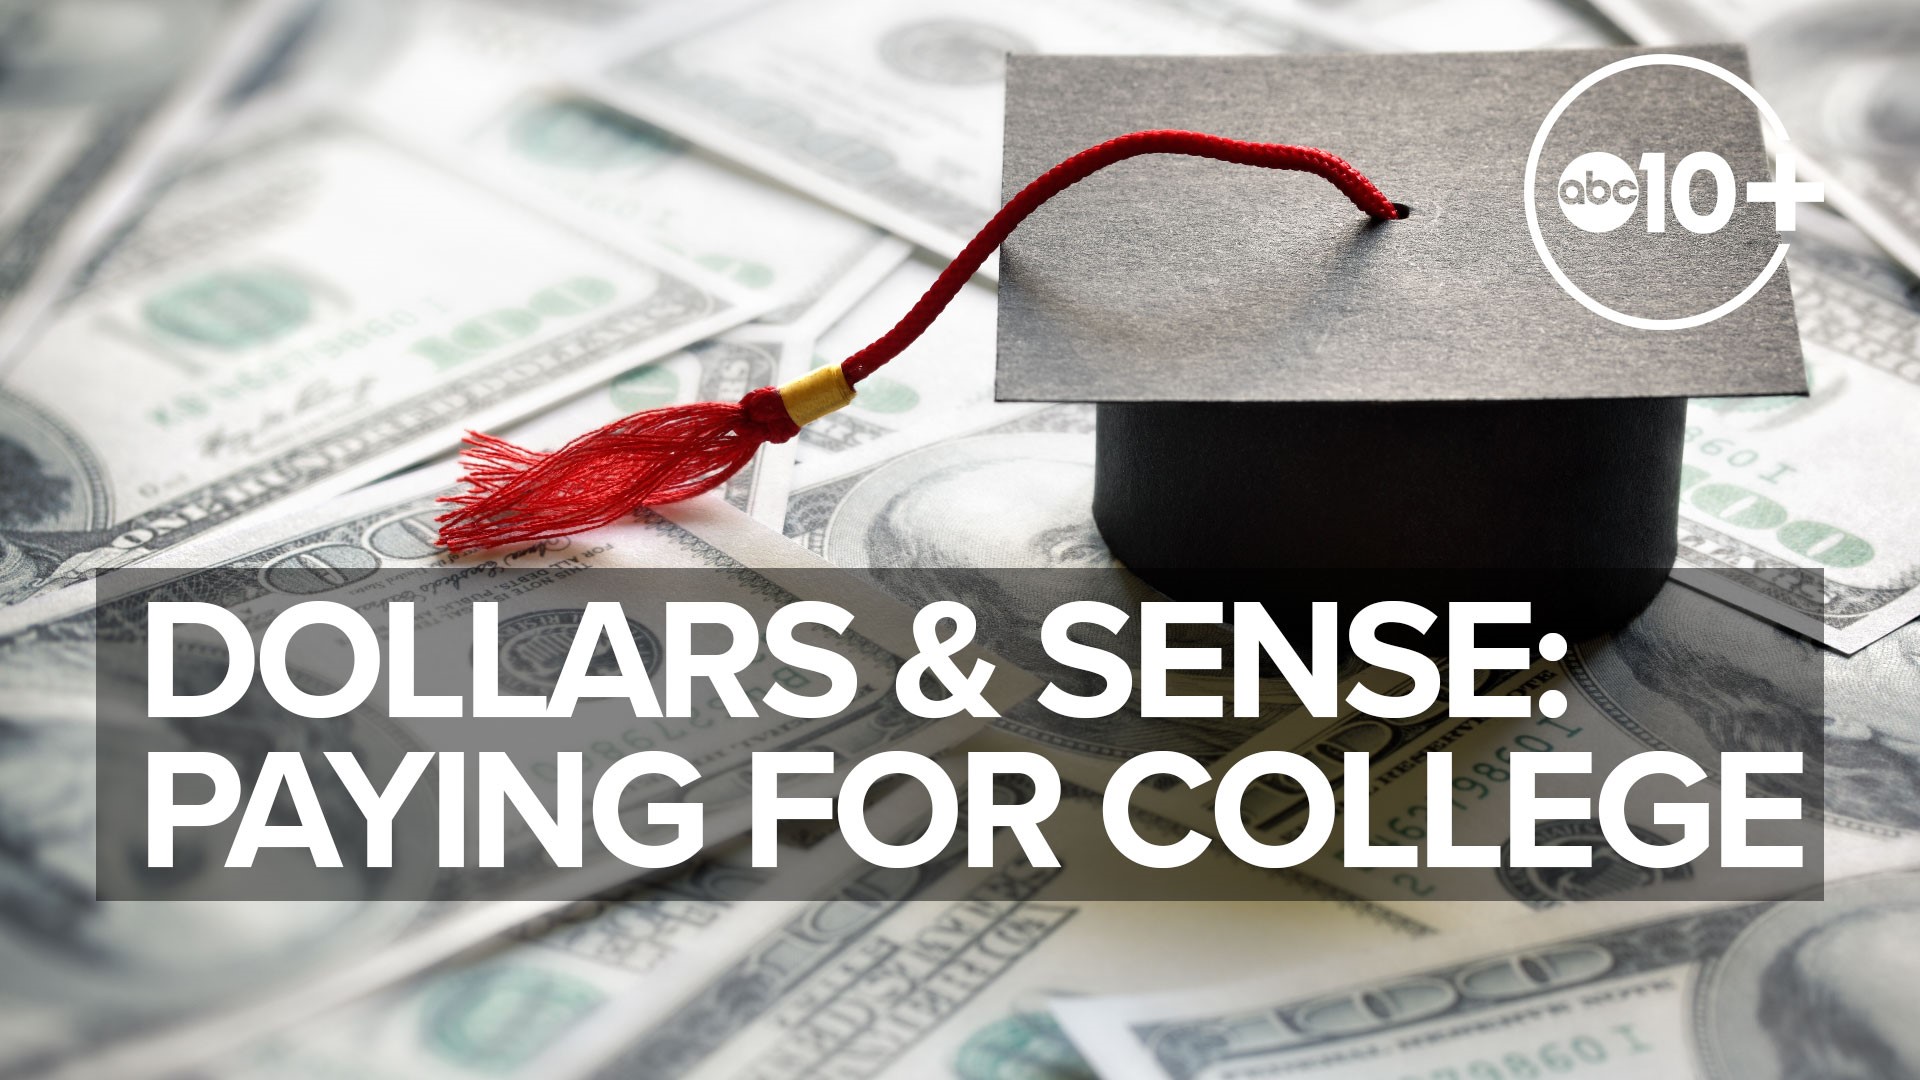 In this episode, we talk about what current, past and future students need to know about paying for college.